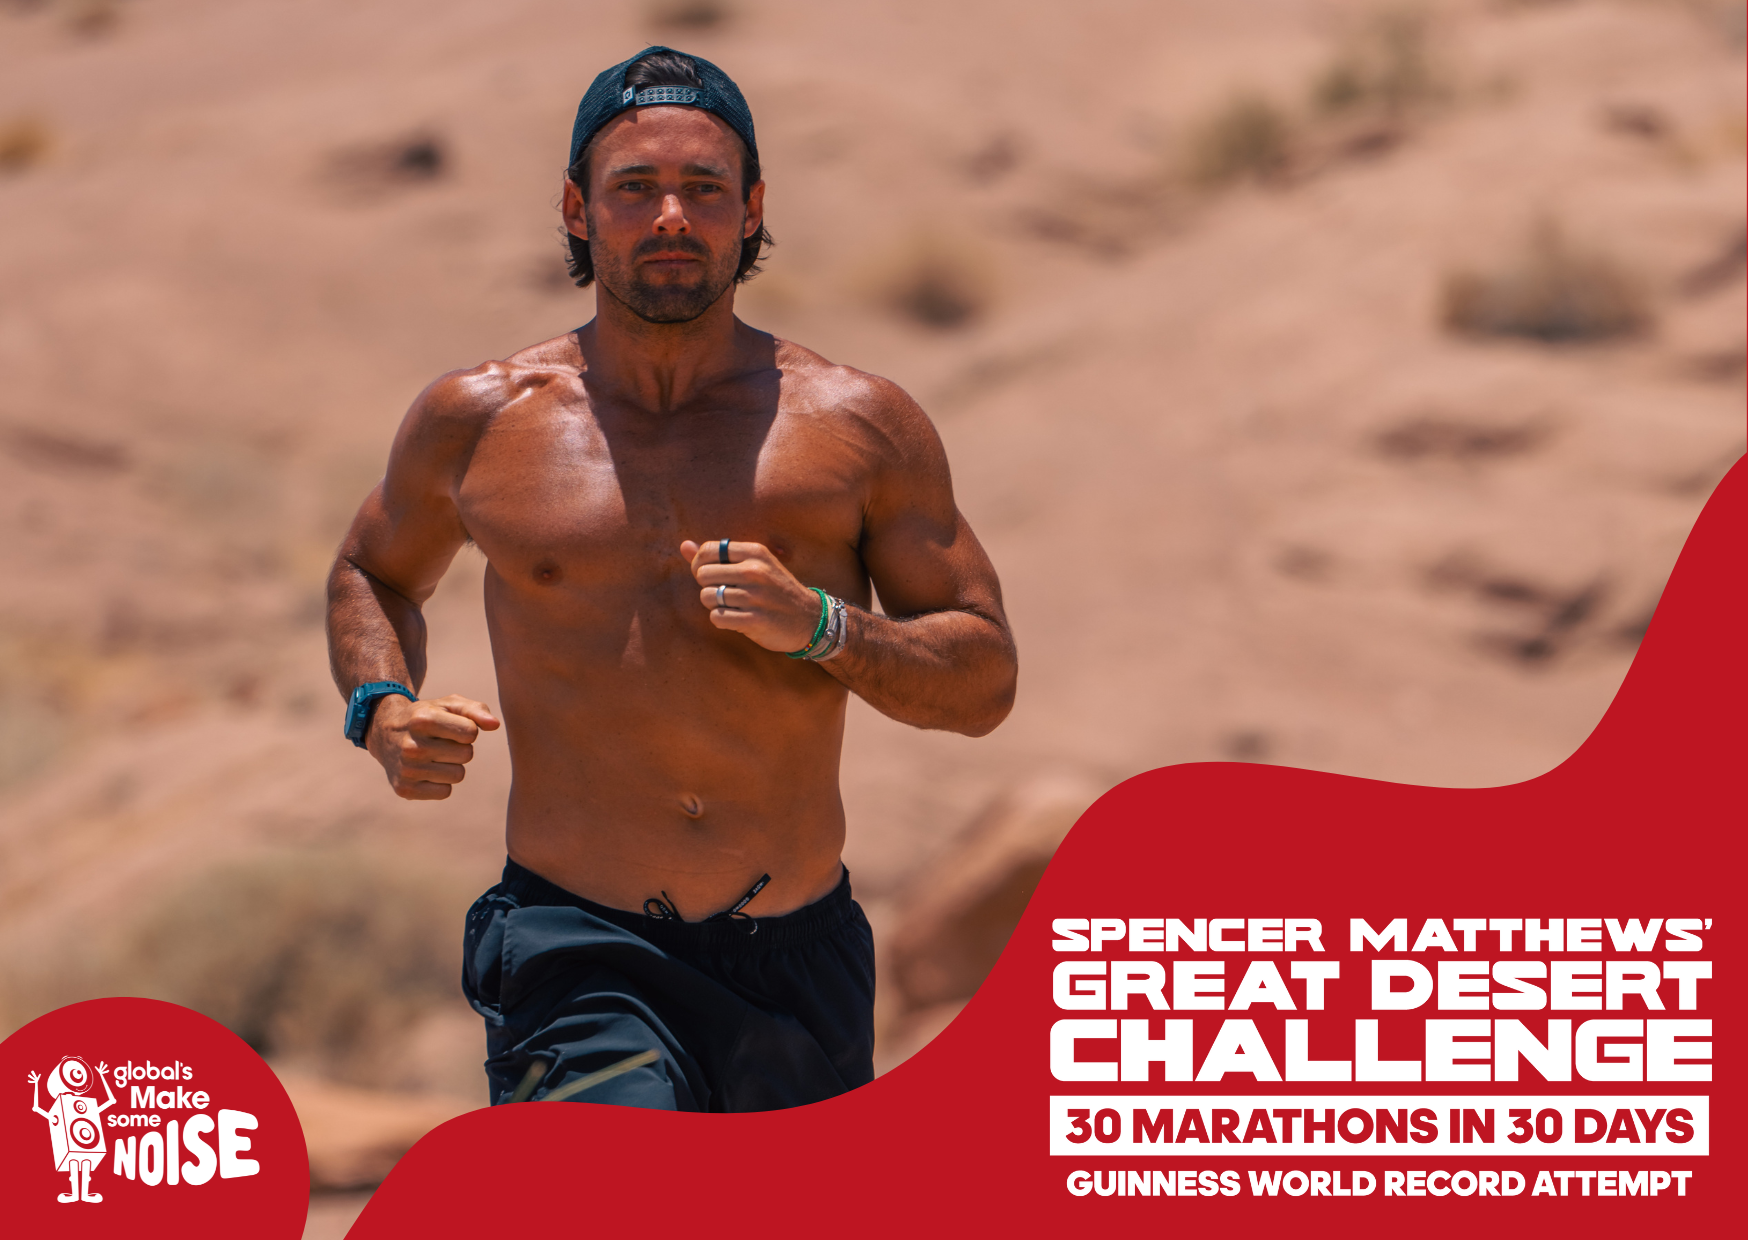 Thank you for supporting Spencer’s Great Desert Challenge World Record Attempt